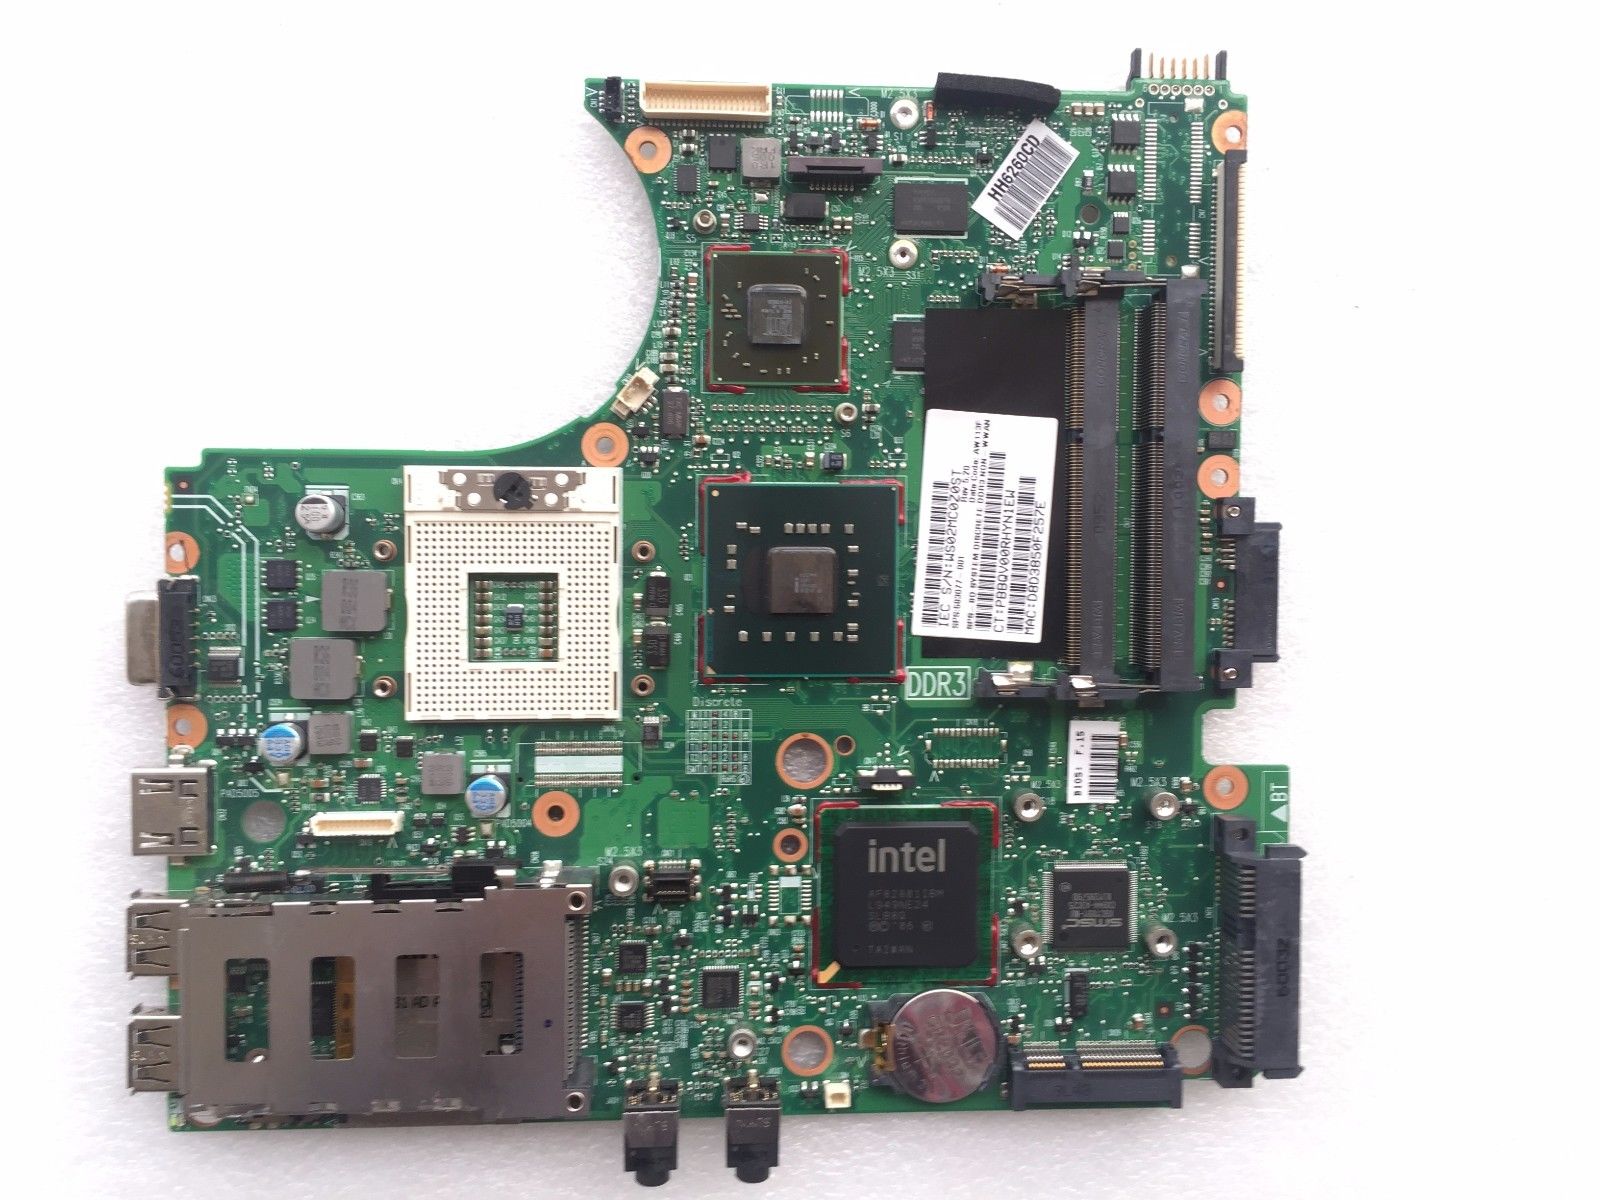 583077-001HP 4411S INTEL ATI graphics card notebook Laptop Motherboard DDR3 PM45 Number of Memory Slots: 2 M